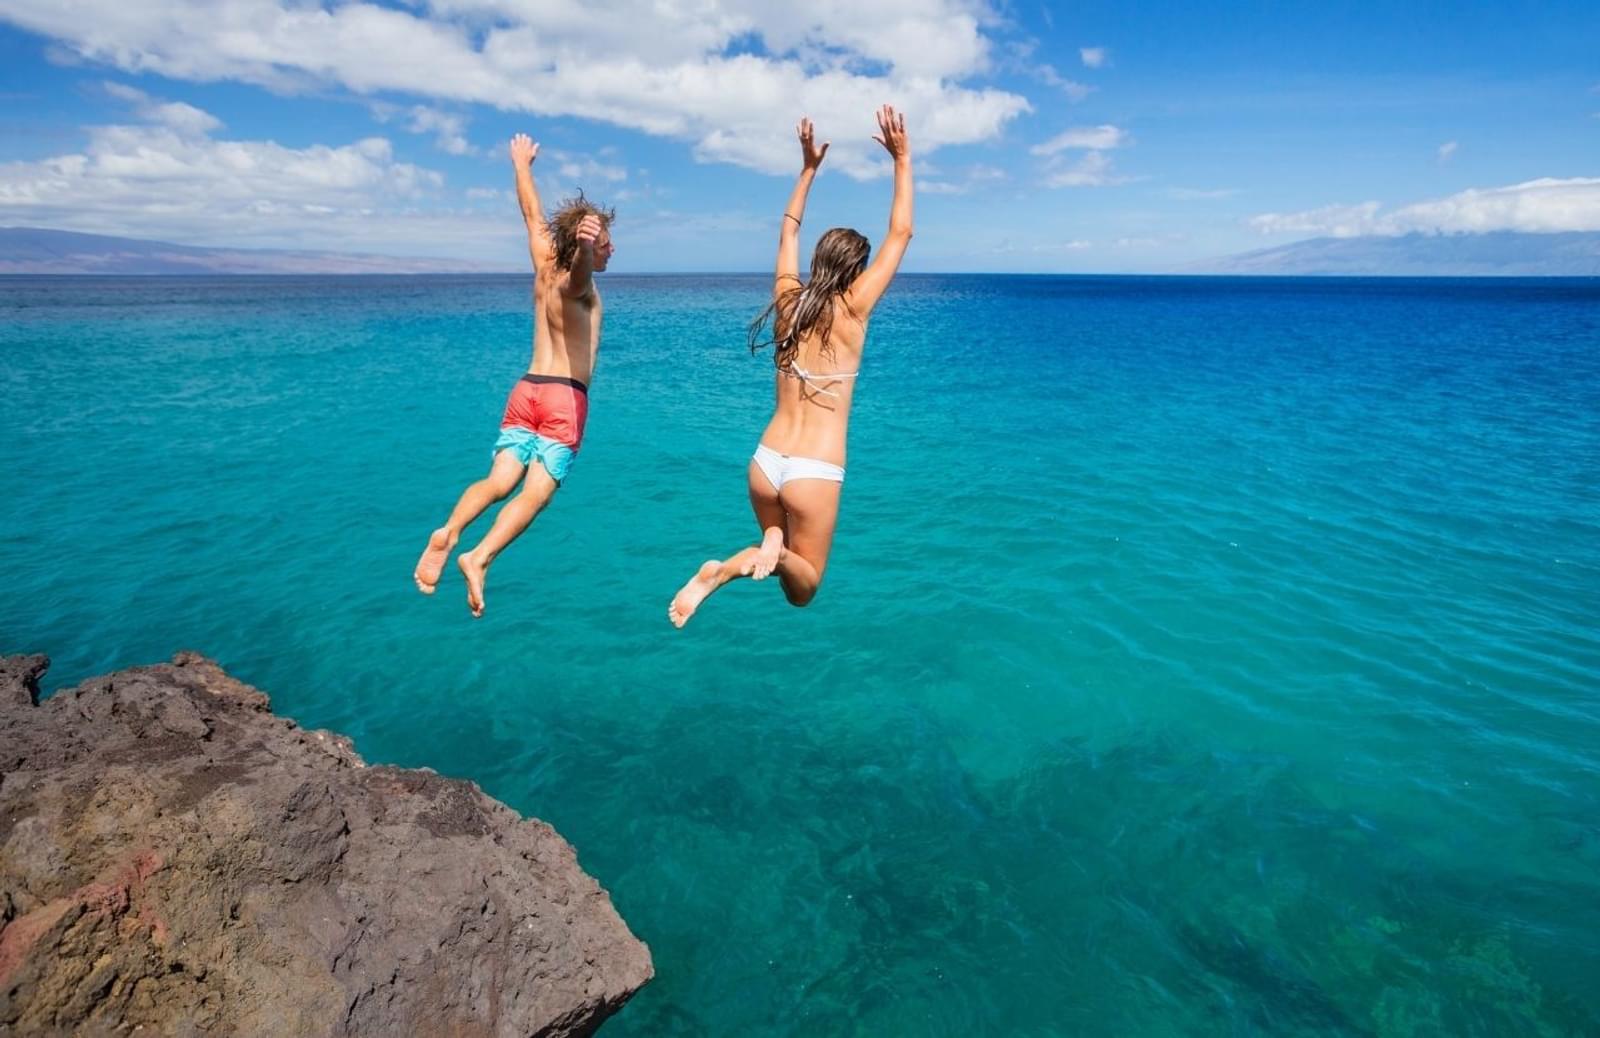 Two girls juping into clear blue ocean water